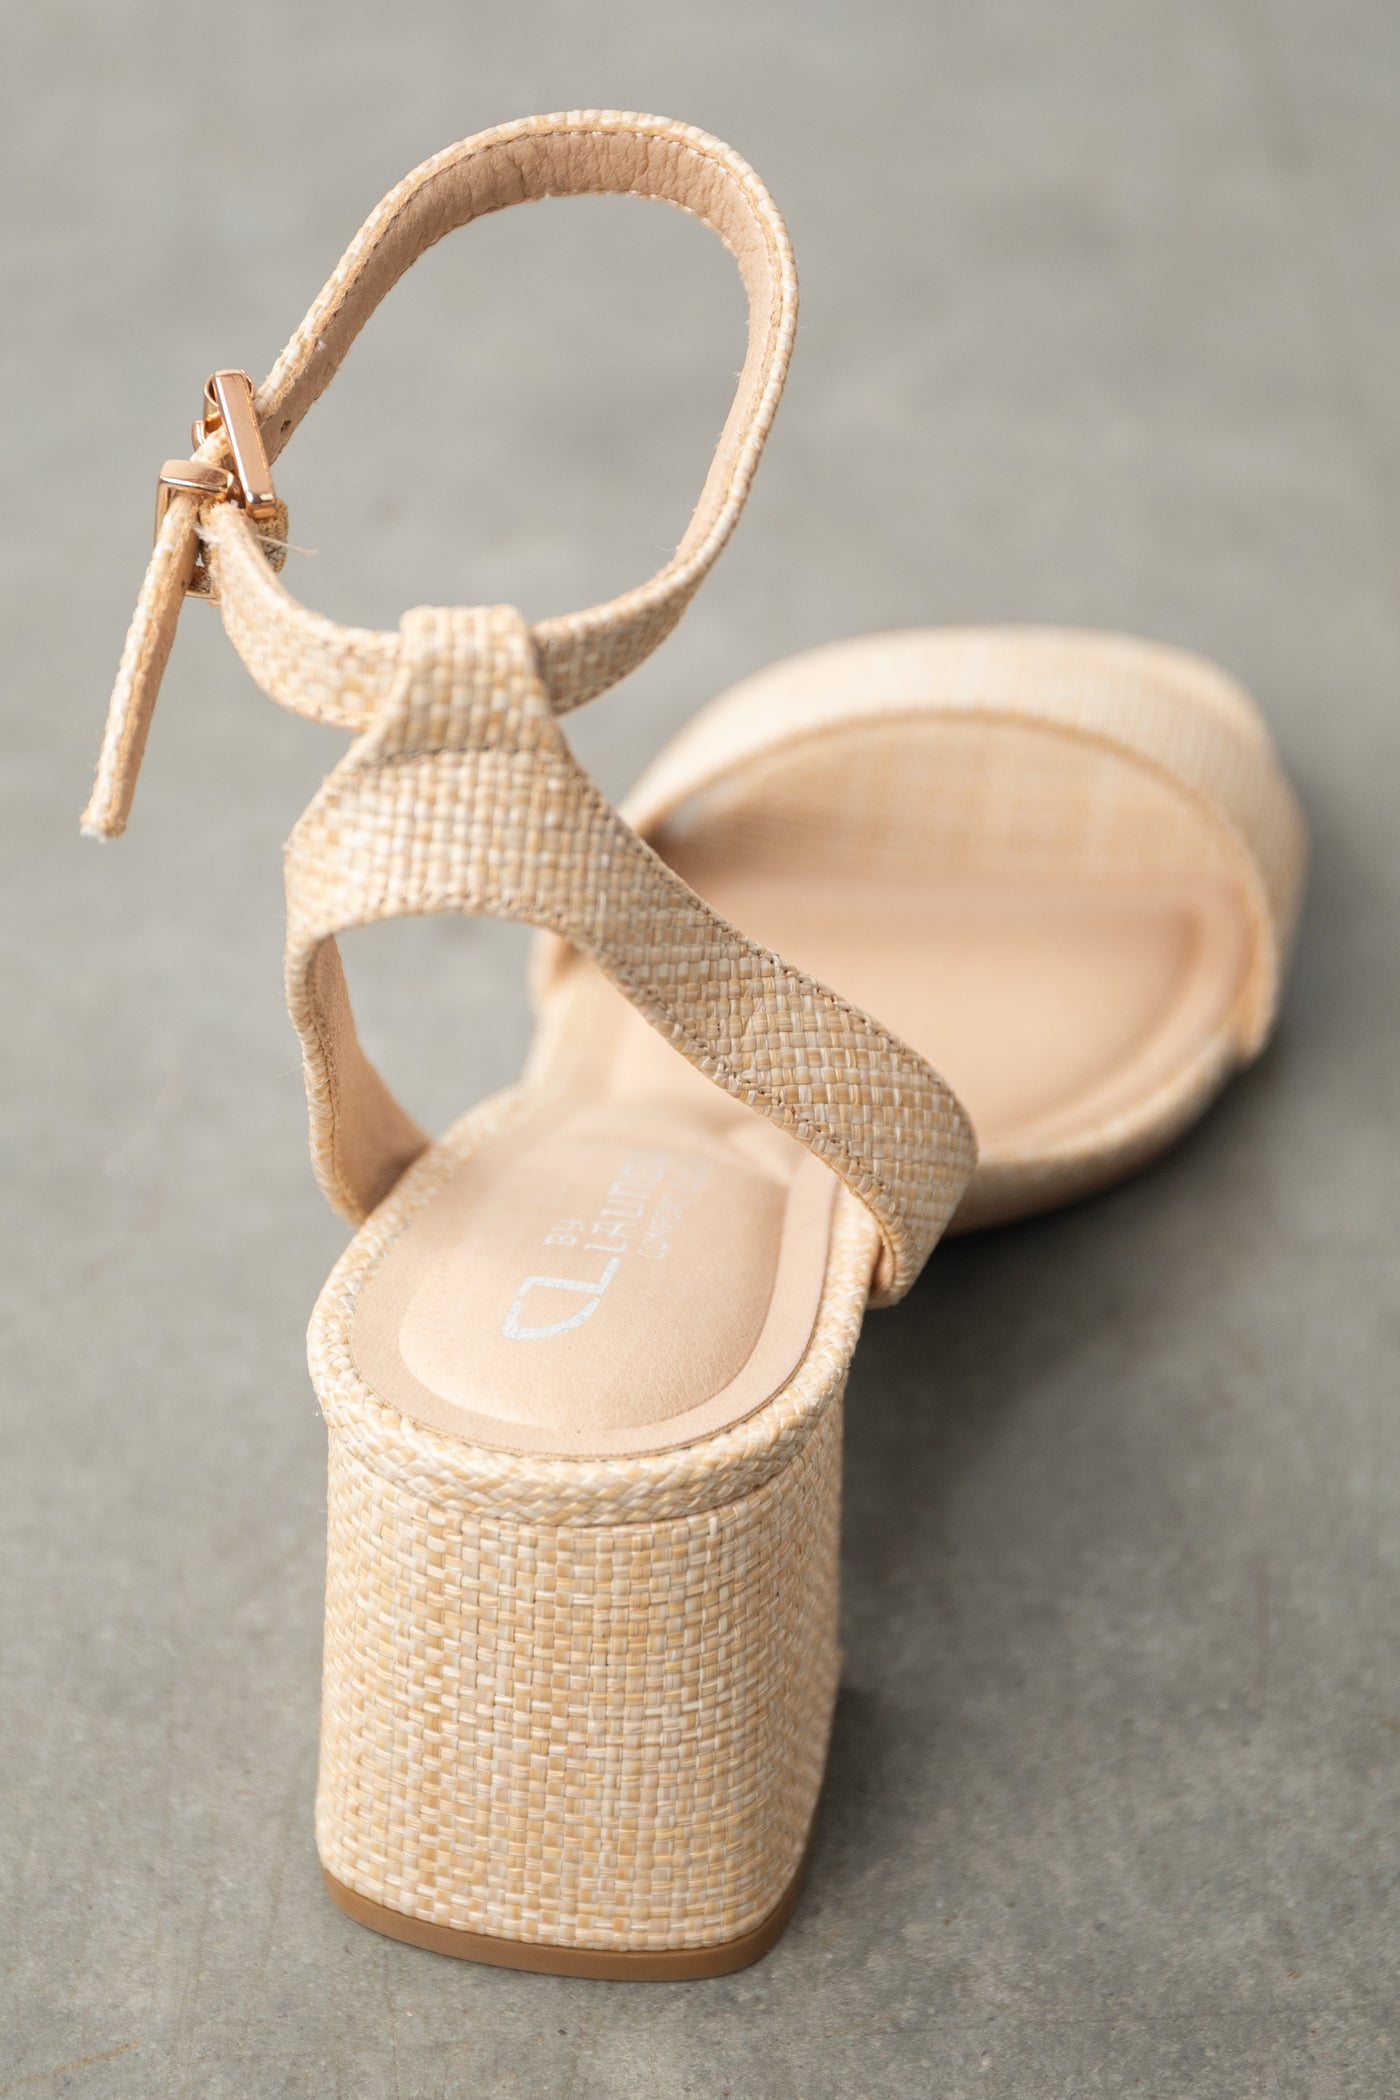 Beige Woven Straw Block Heels with Ankle Strap